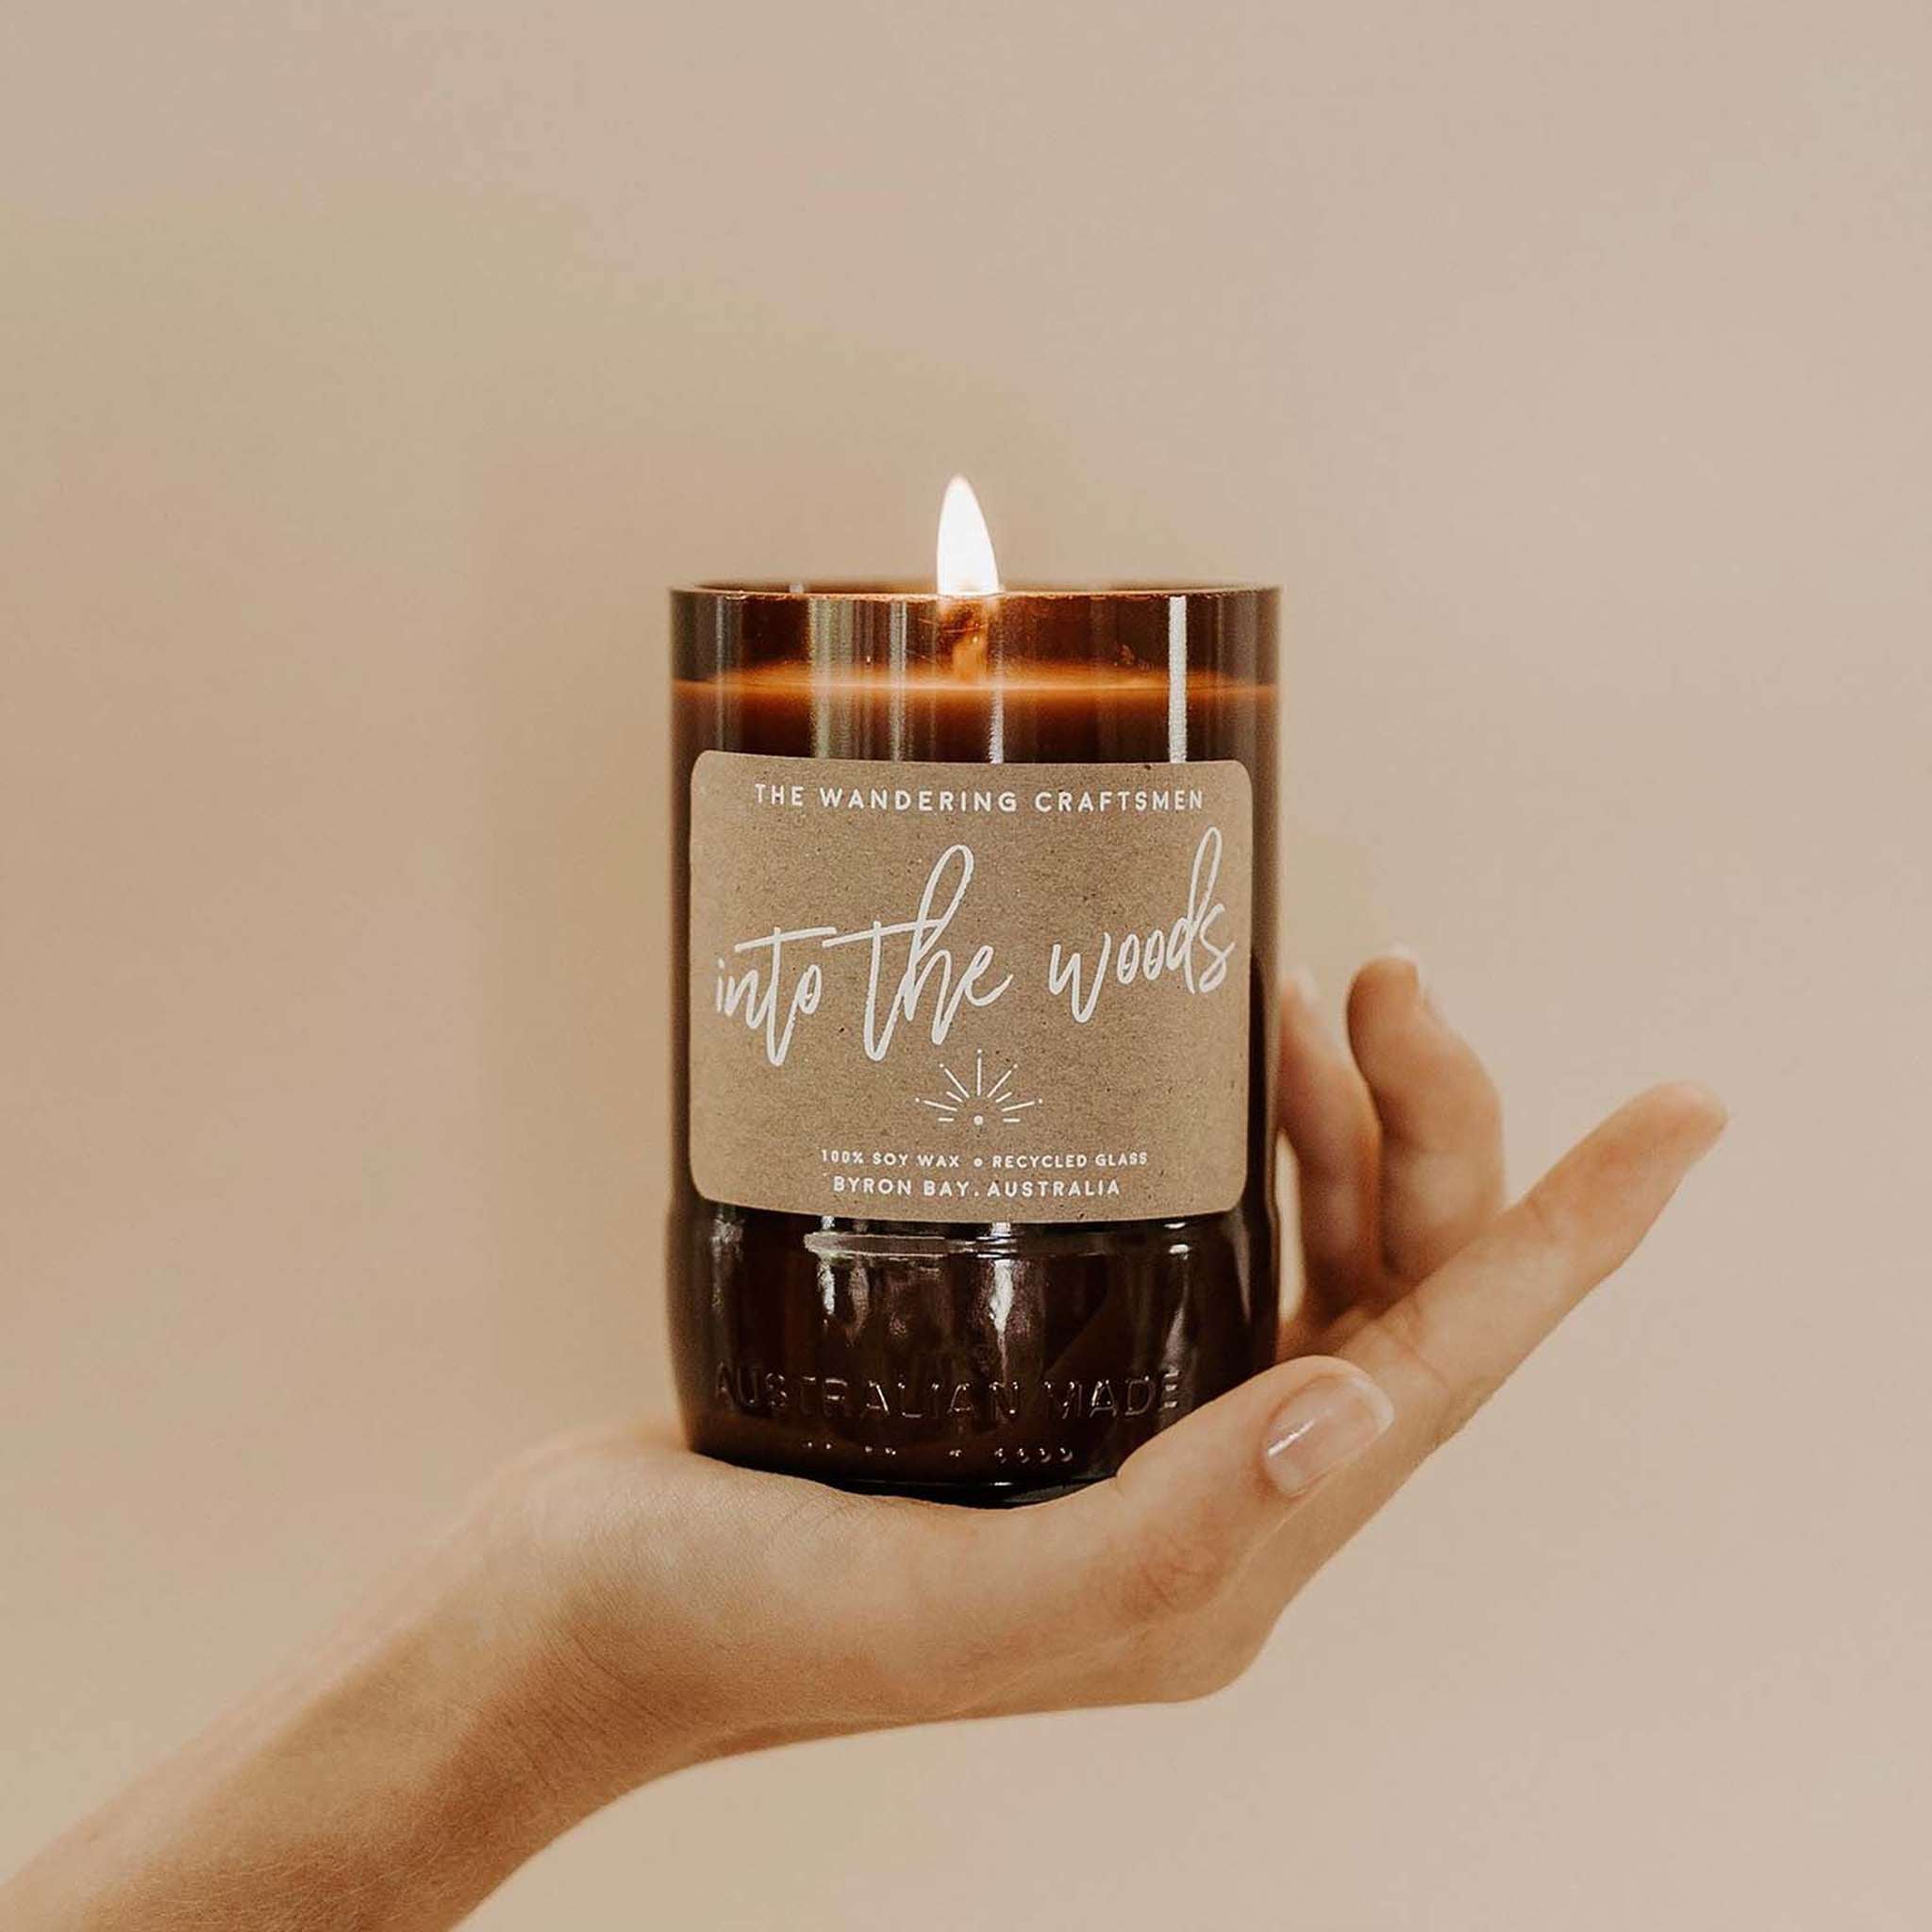 Into the Woods Australian made soy wax candle in recycled glass jar.